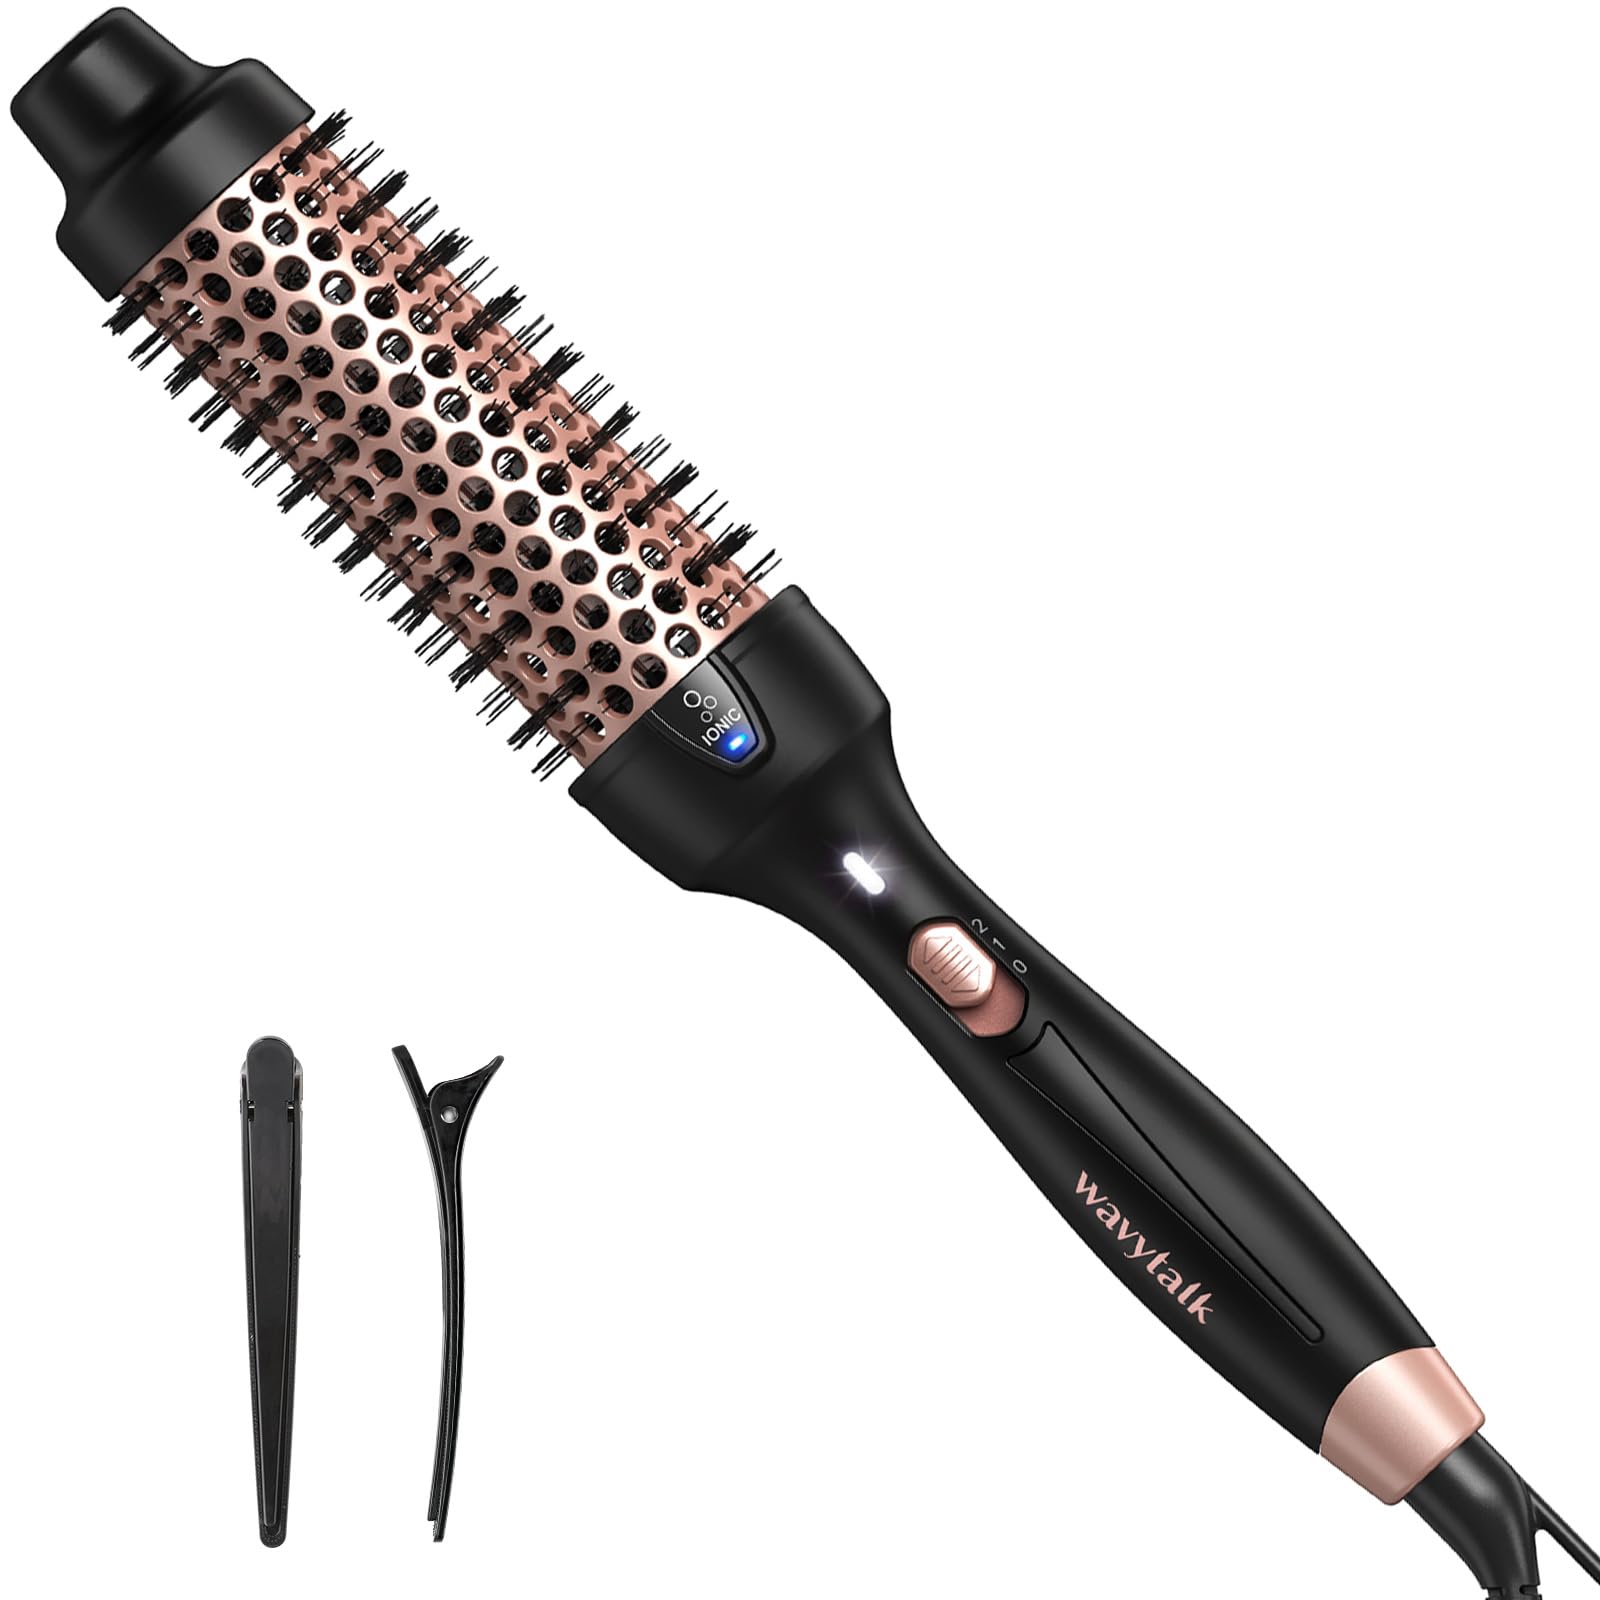 Wavytalk Pro Heated Round Brush for Blowout Look, 1 1/2 Inch Ionic Curling Iron Brush Makes Hair Shinier & Smoother, Dual Voltag